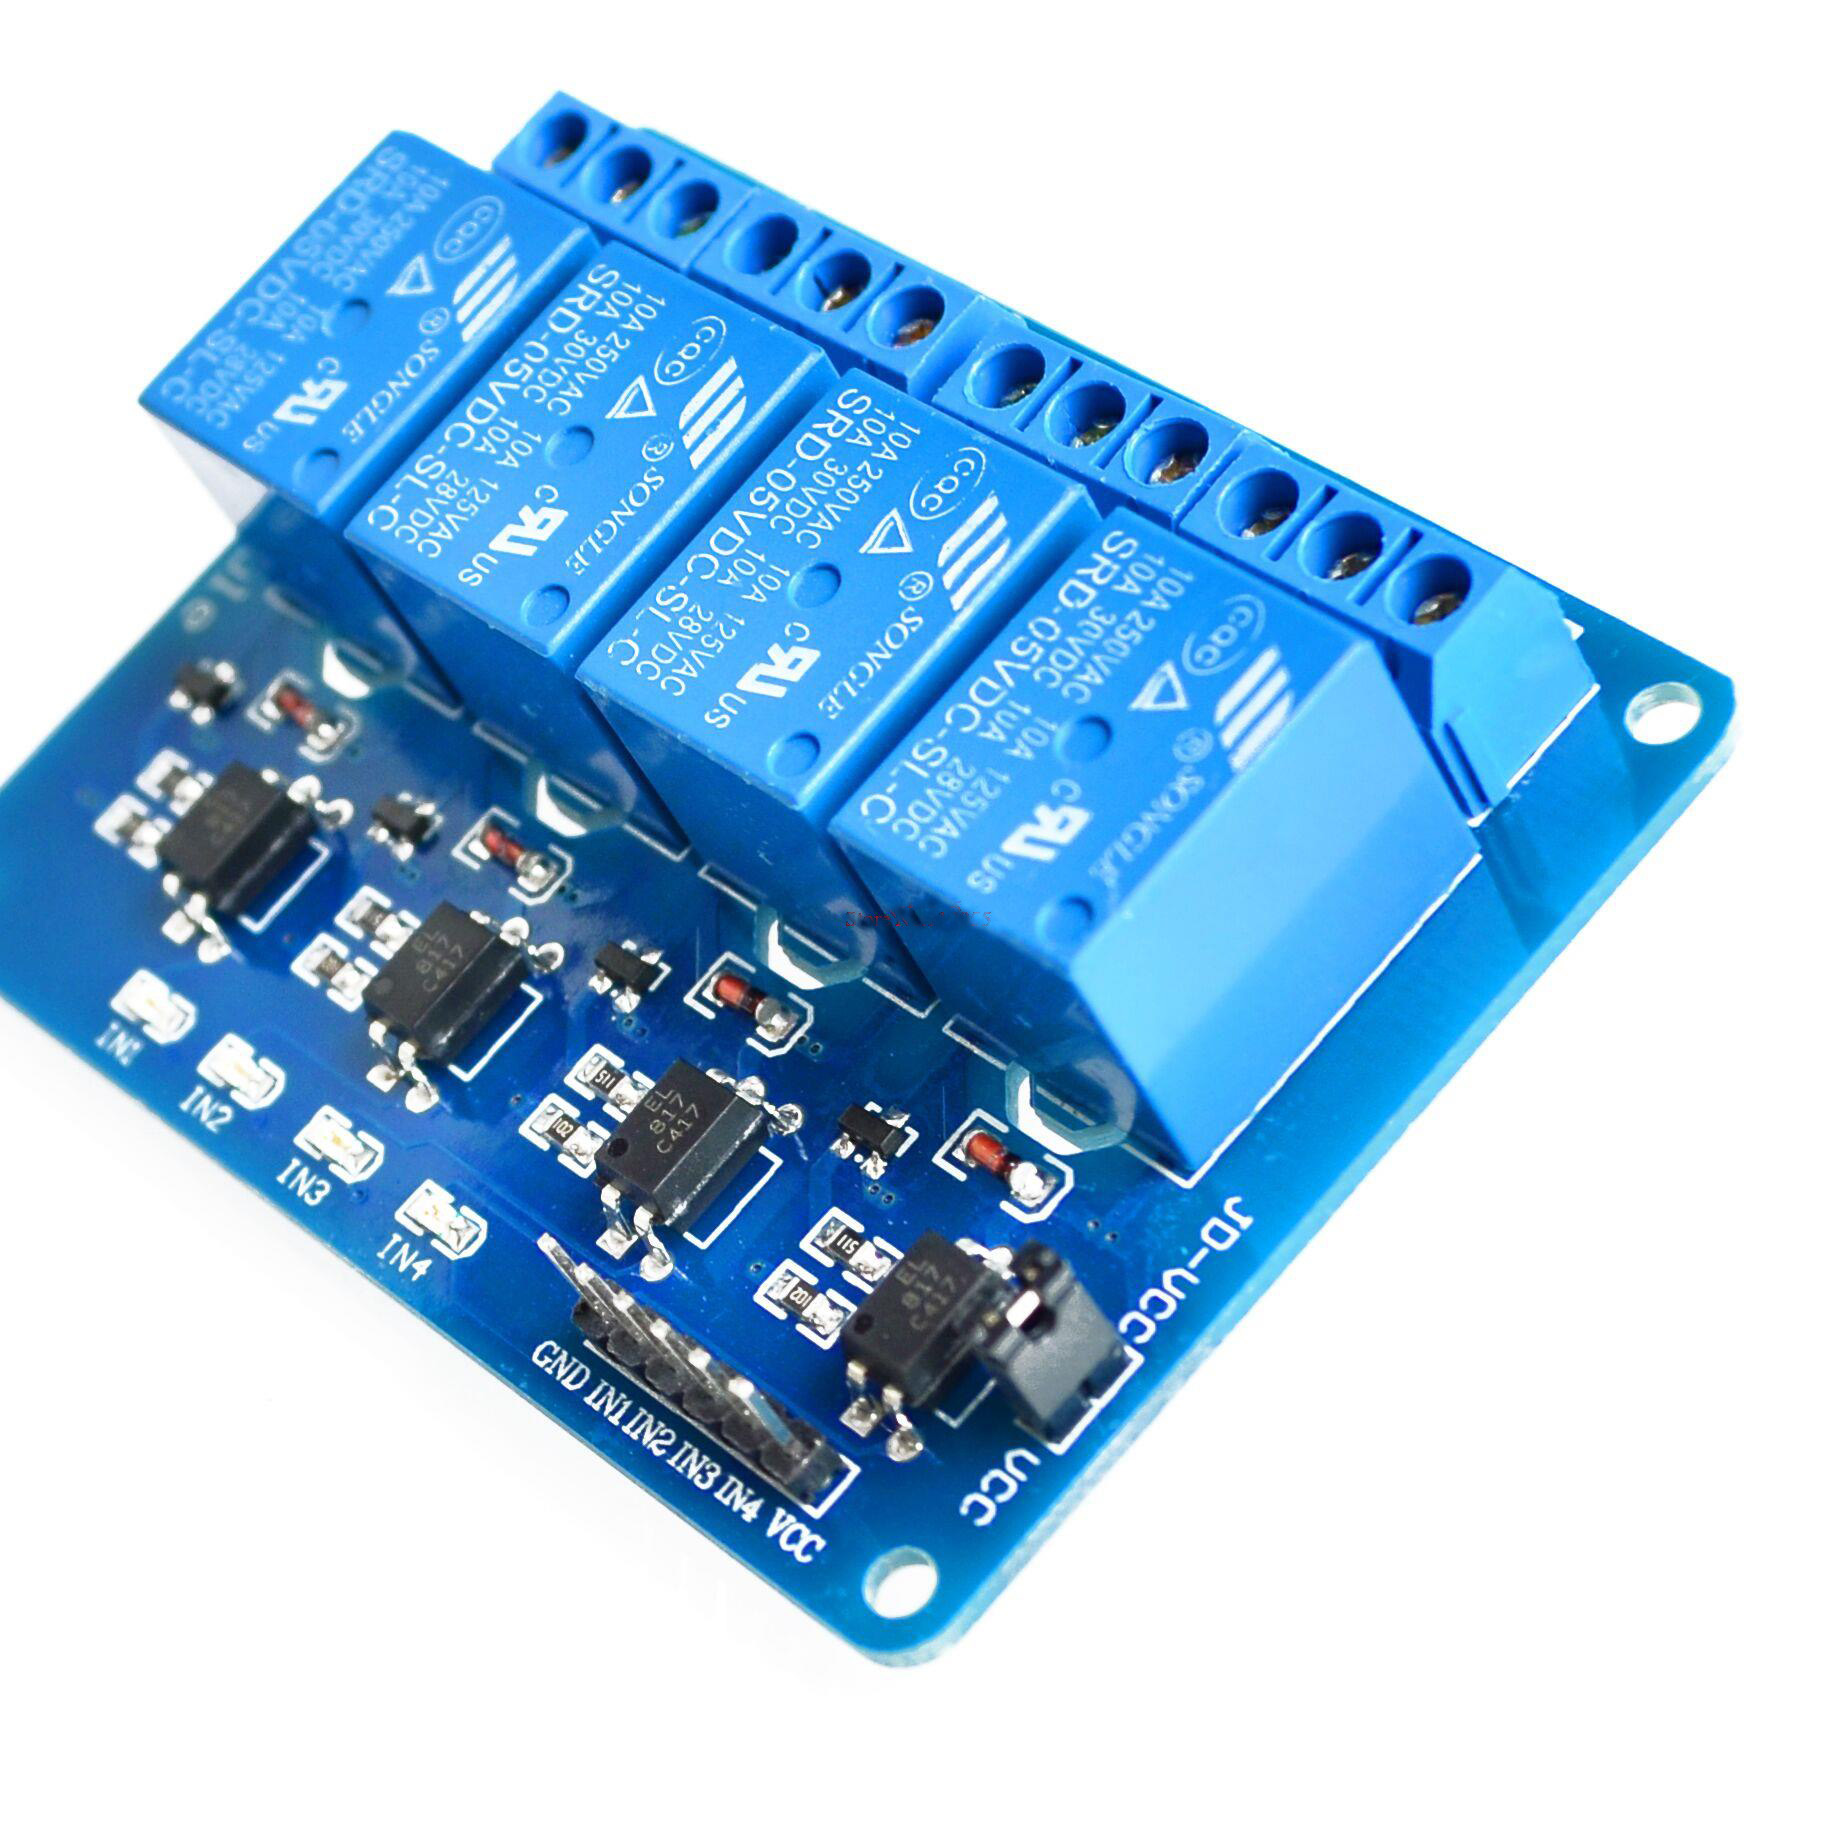 12v Dc Relay Modules 1 2 4 And 8 Way Opto Isolation Arduino Pic Pi